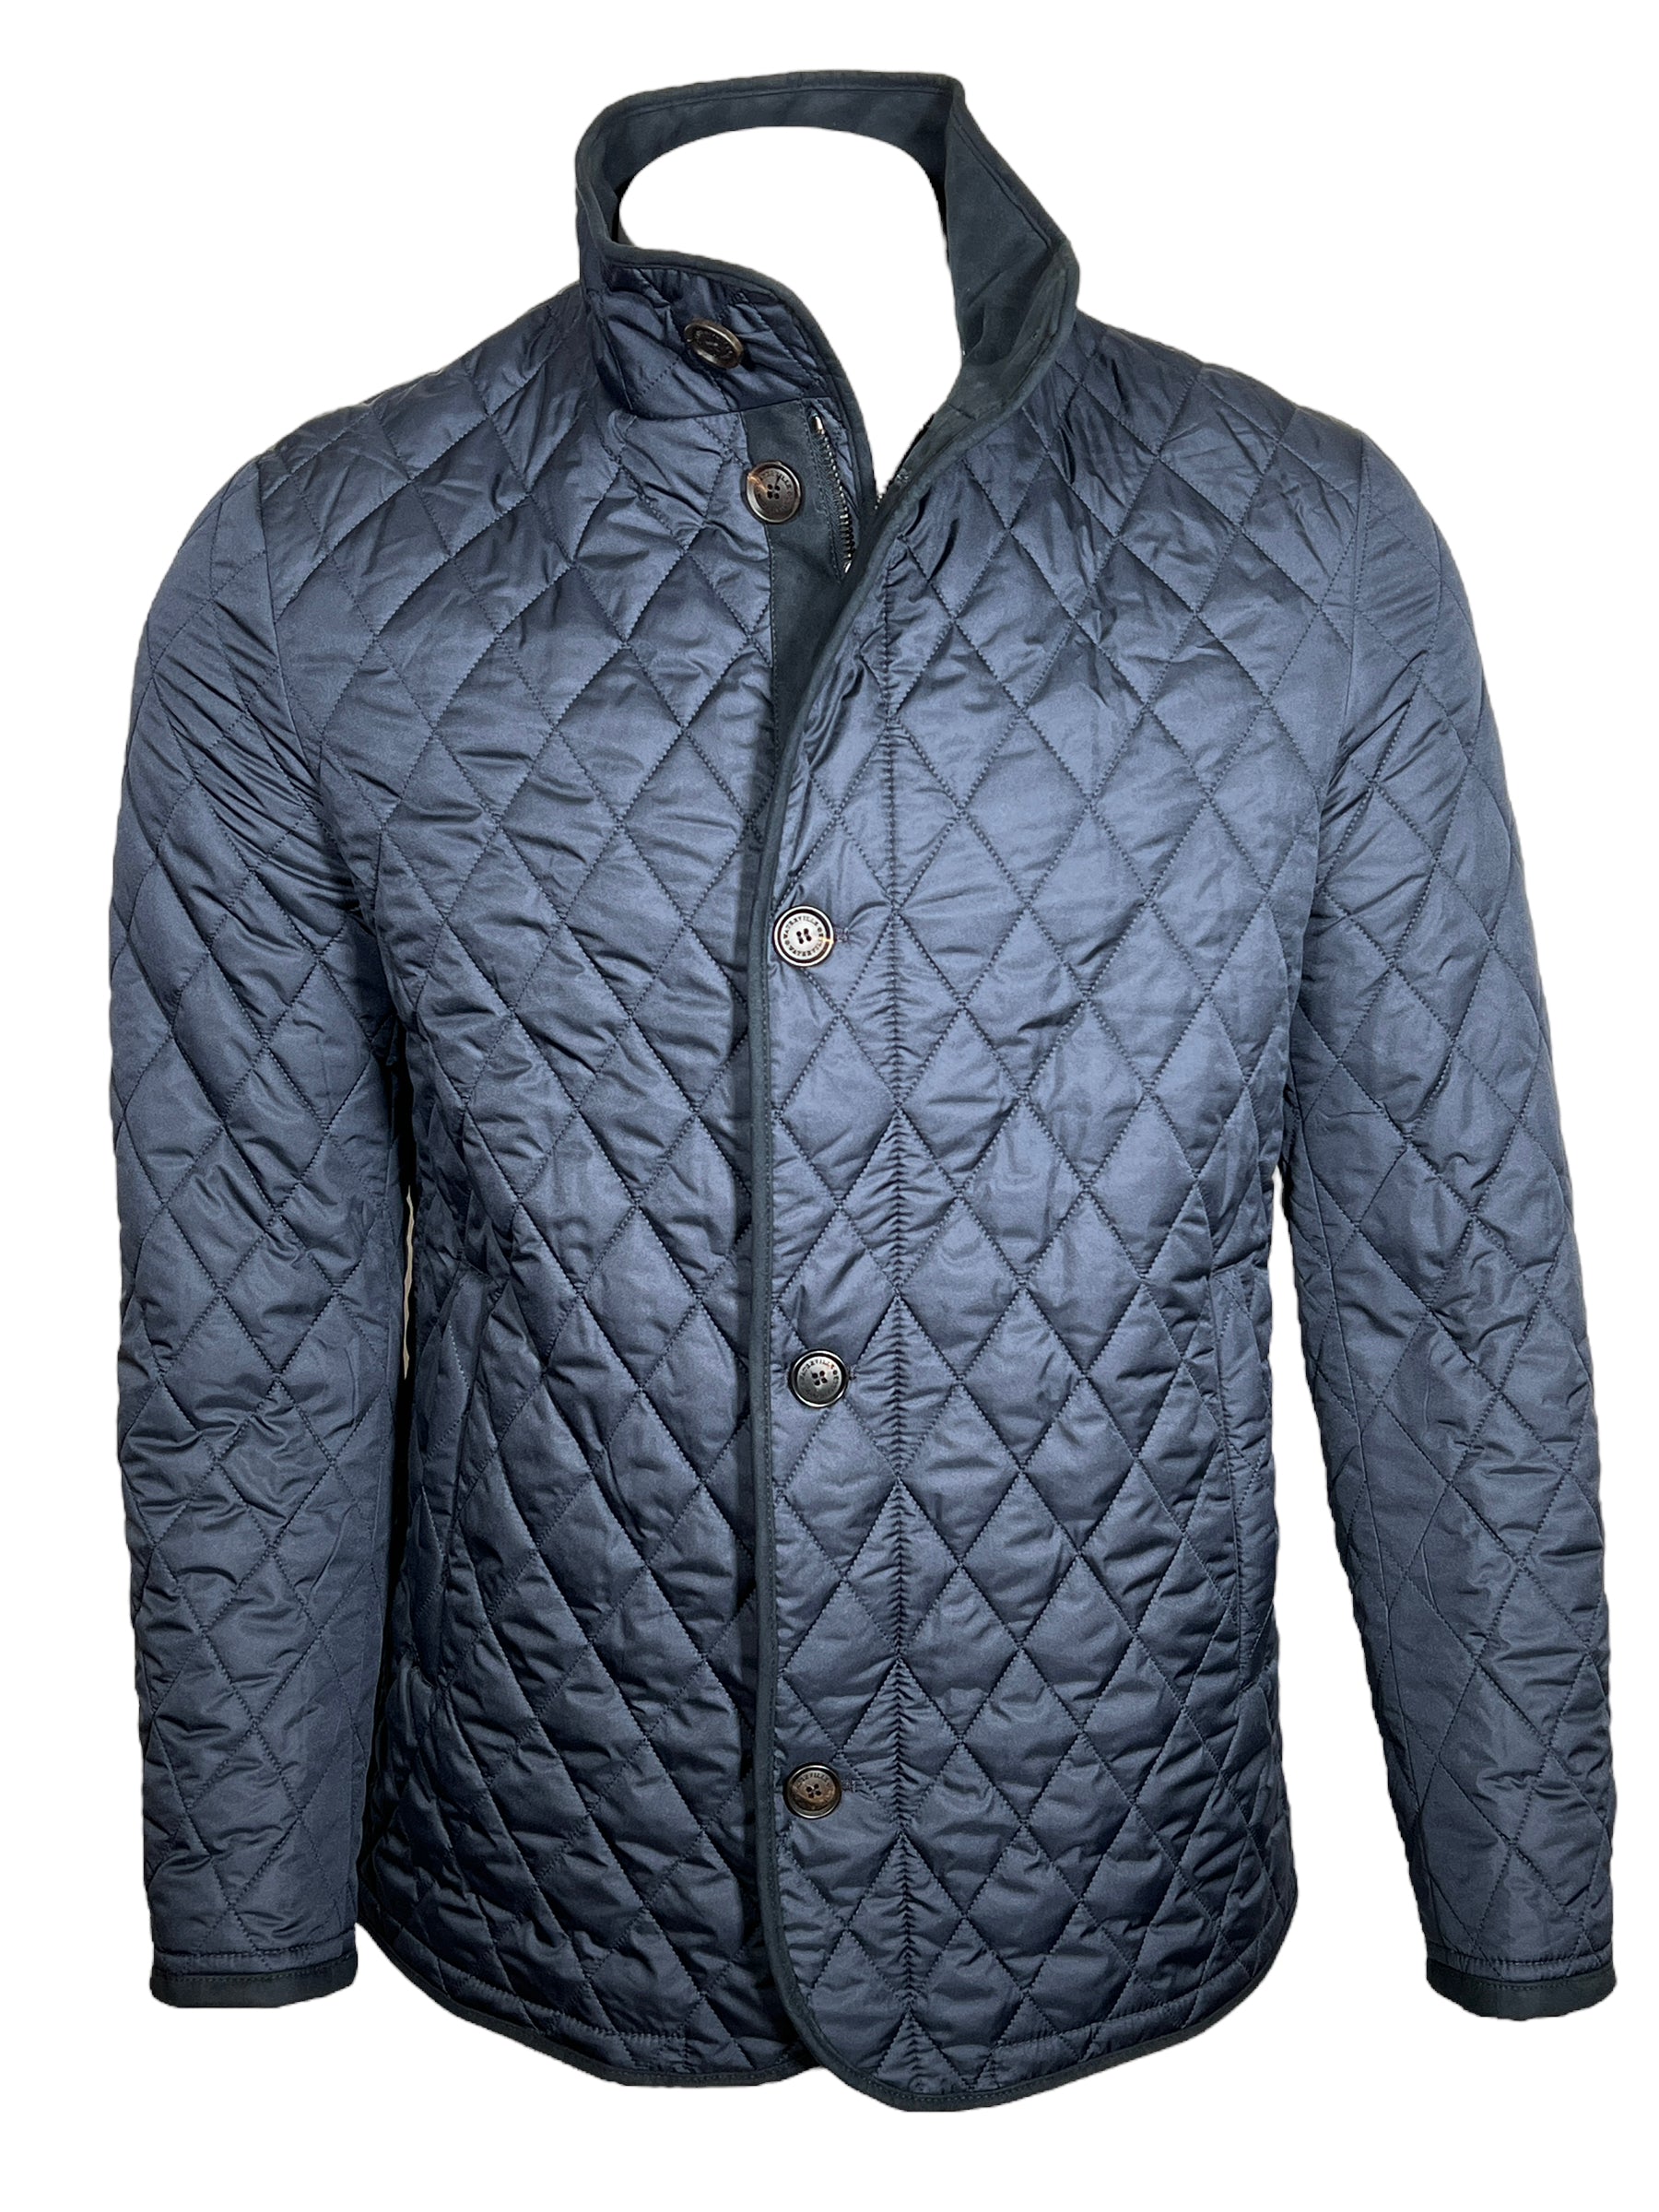 WATERVILLE QUILTED LINED JACKET - NAVY